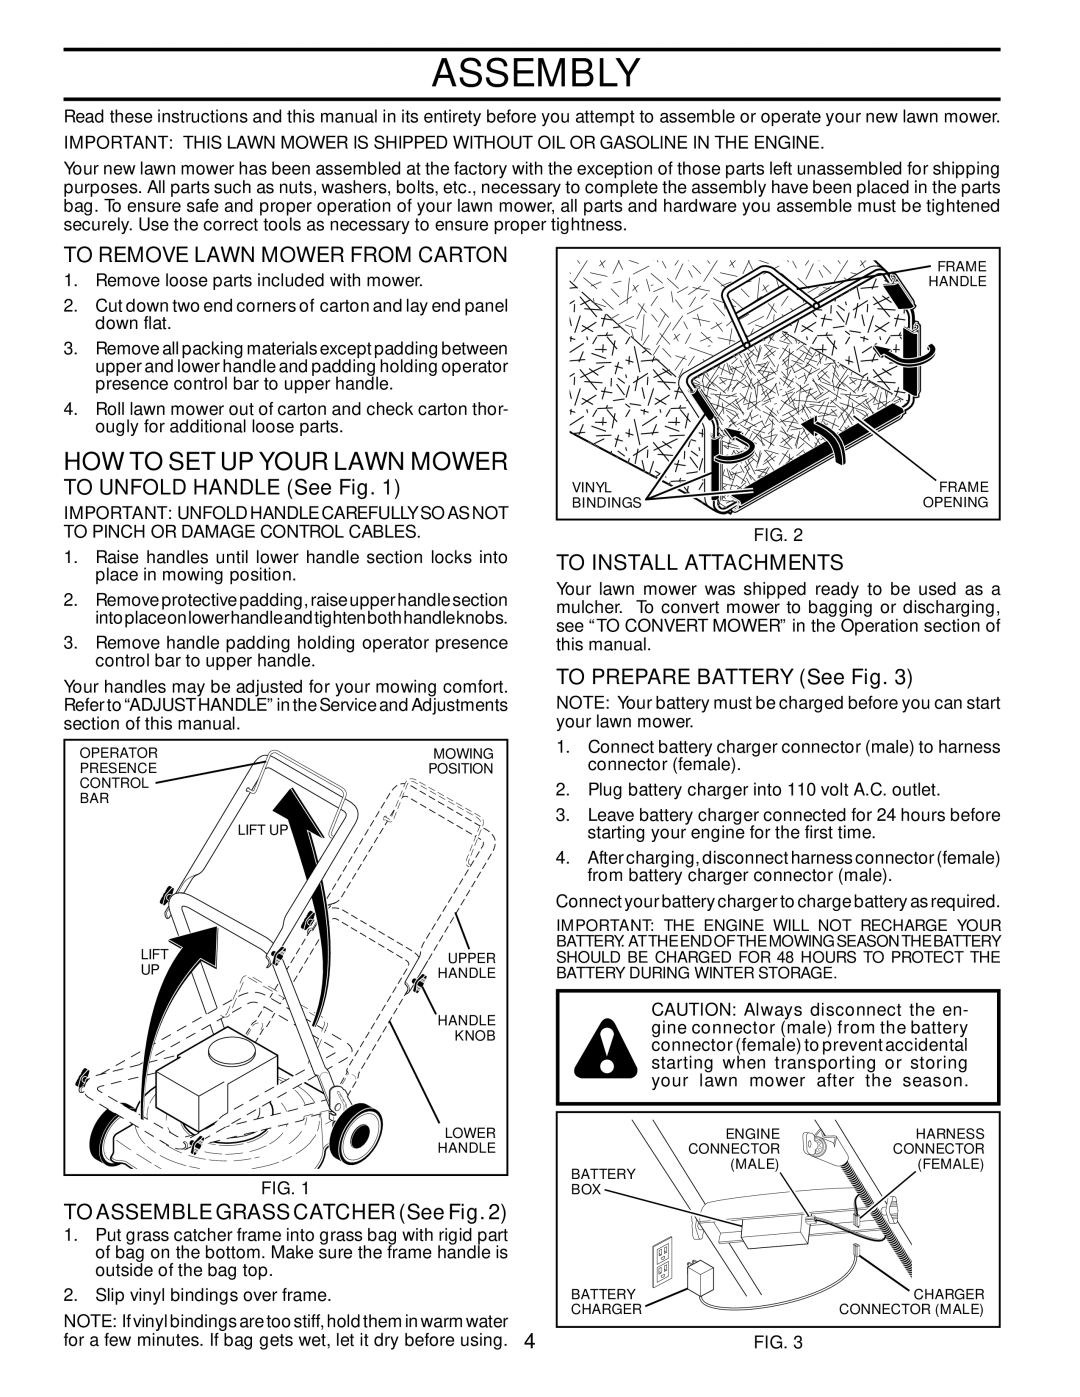 Husqvarna 96143004500 Assembly, To Remove Lawn Mower From Carton, TO UNFOLD HANDLE See Fig, To Install Attachments 